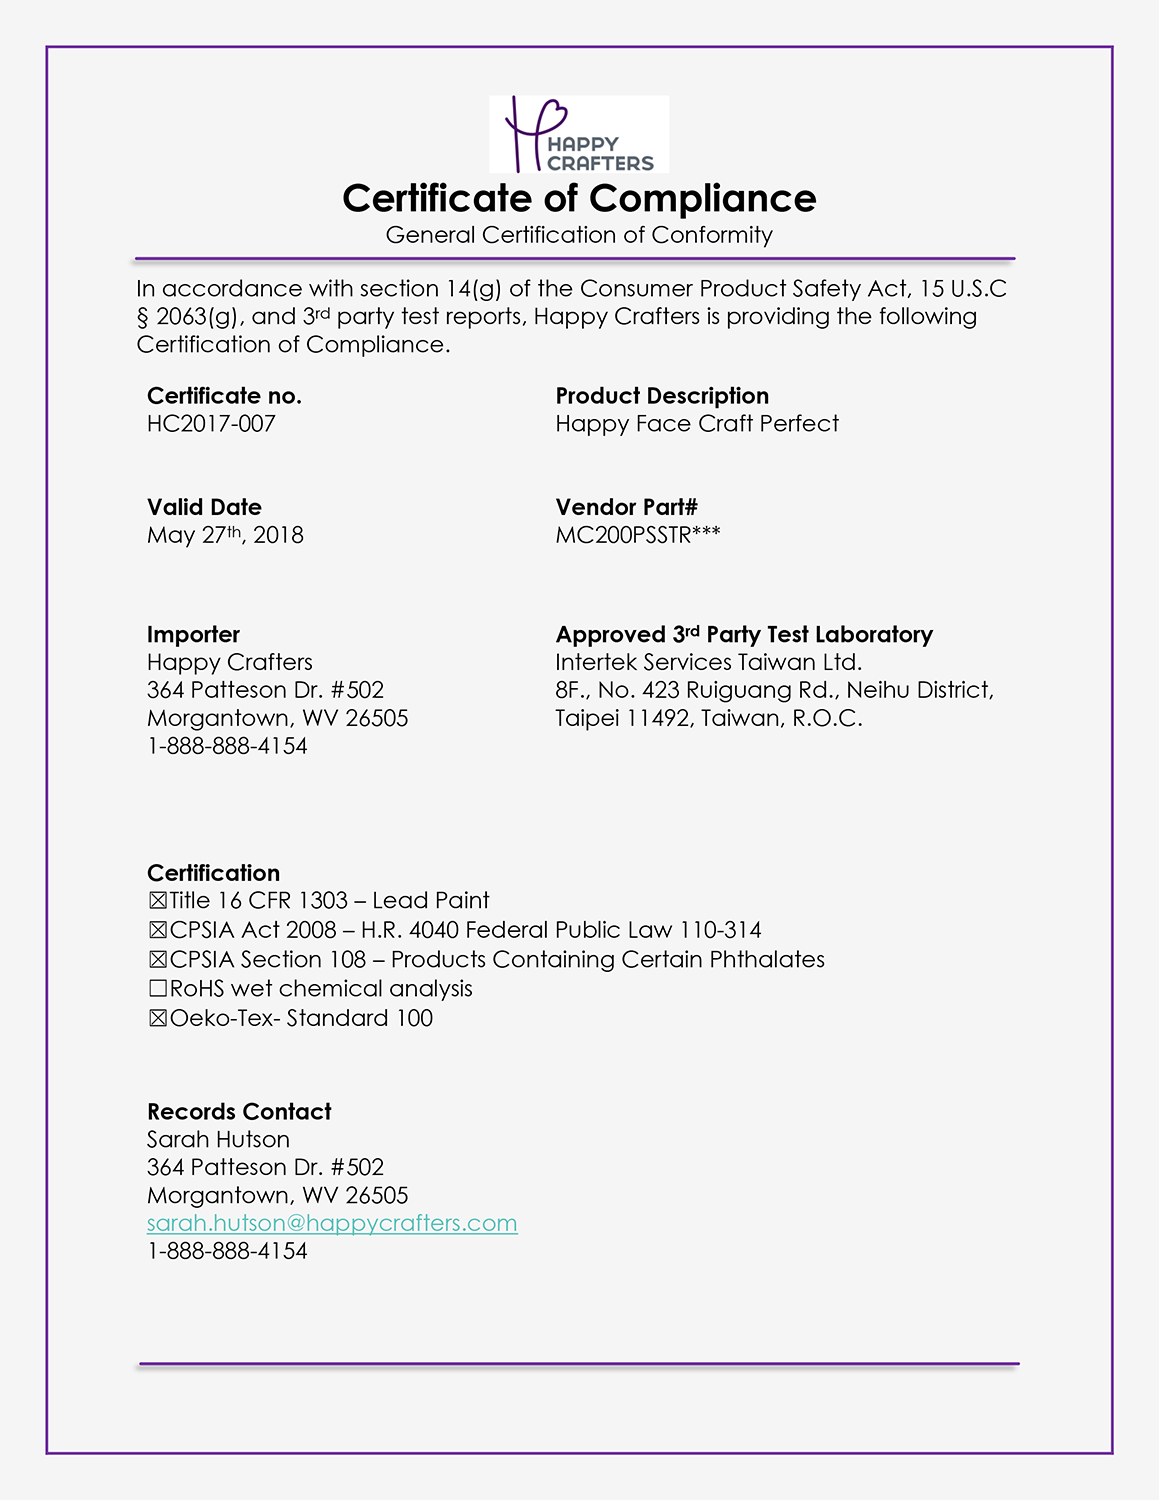 CPSIA-certifications